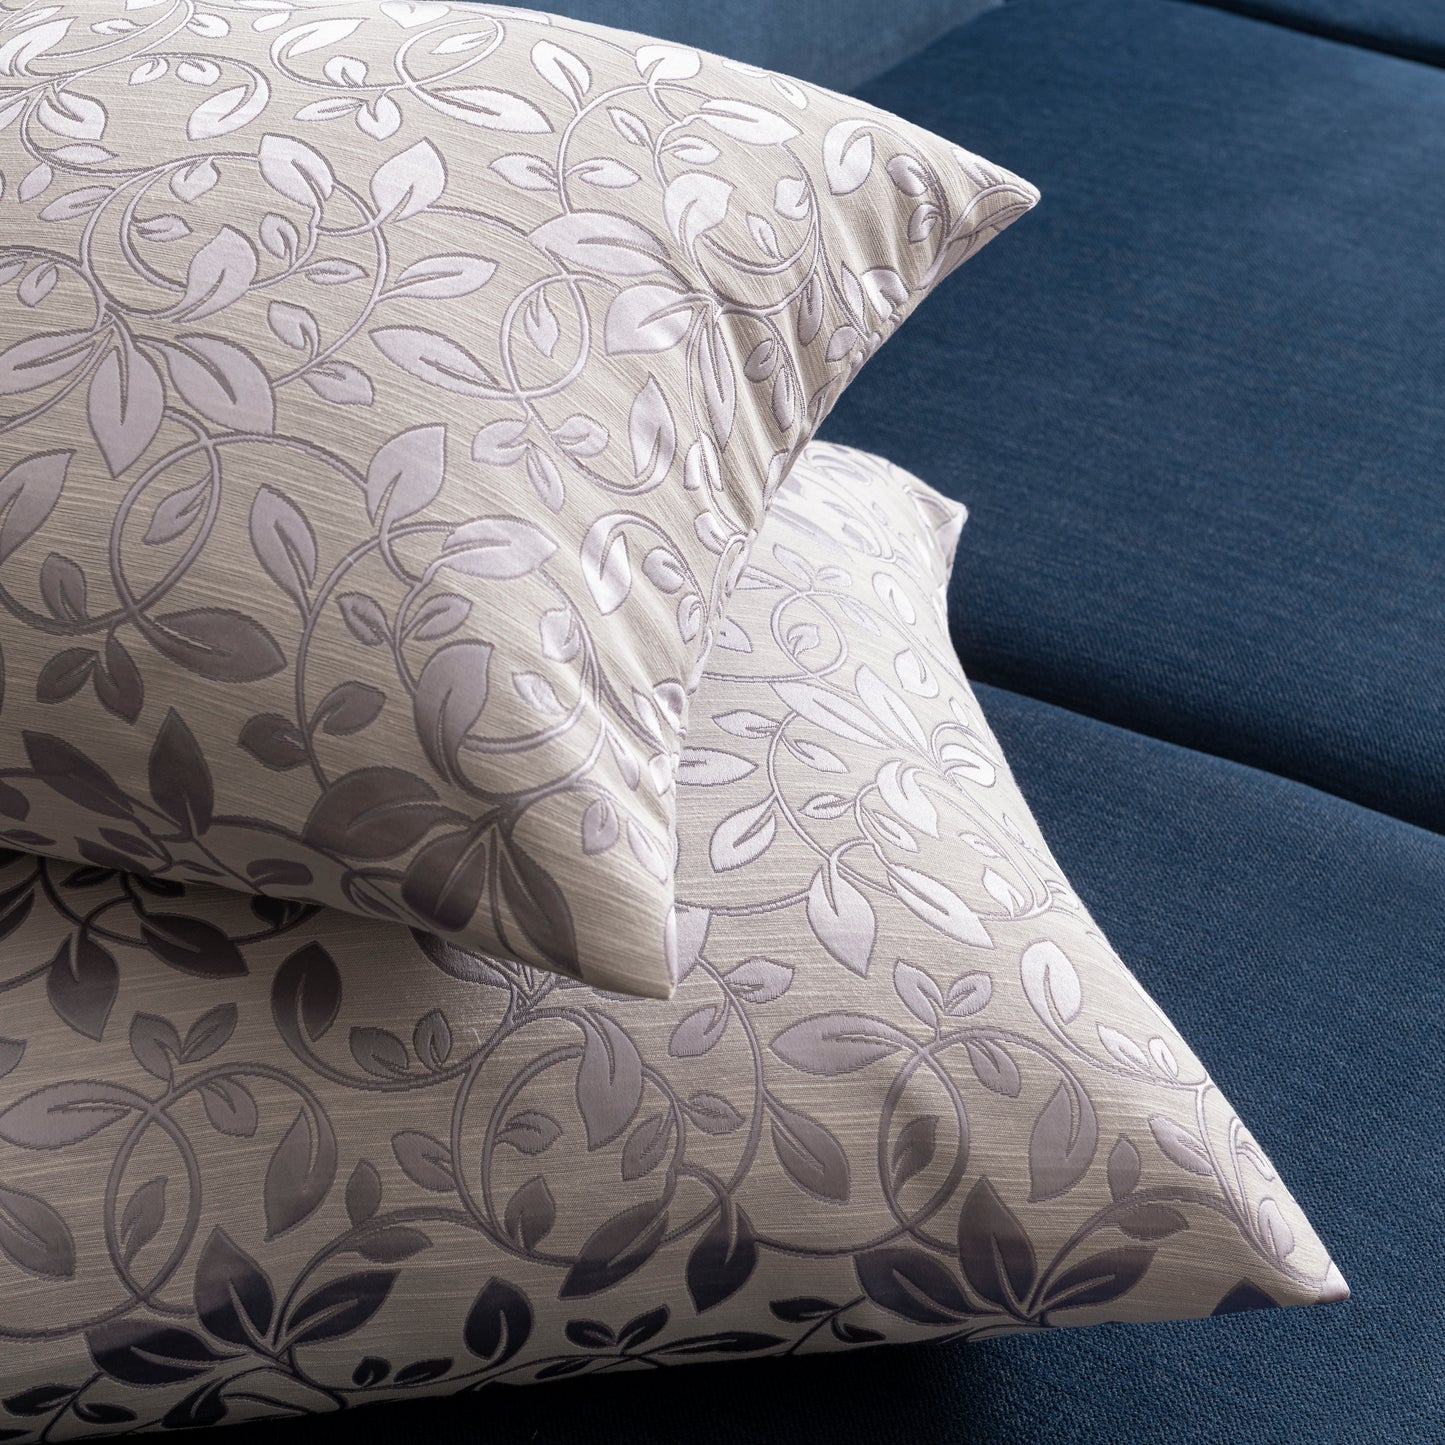 2 purple floral decorative pillows placed on top of each other